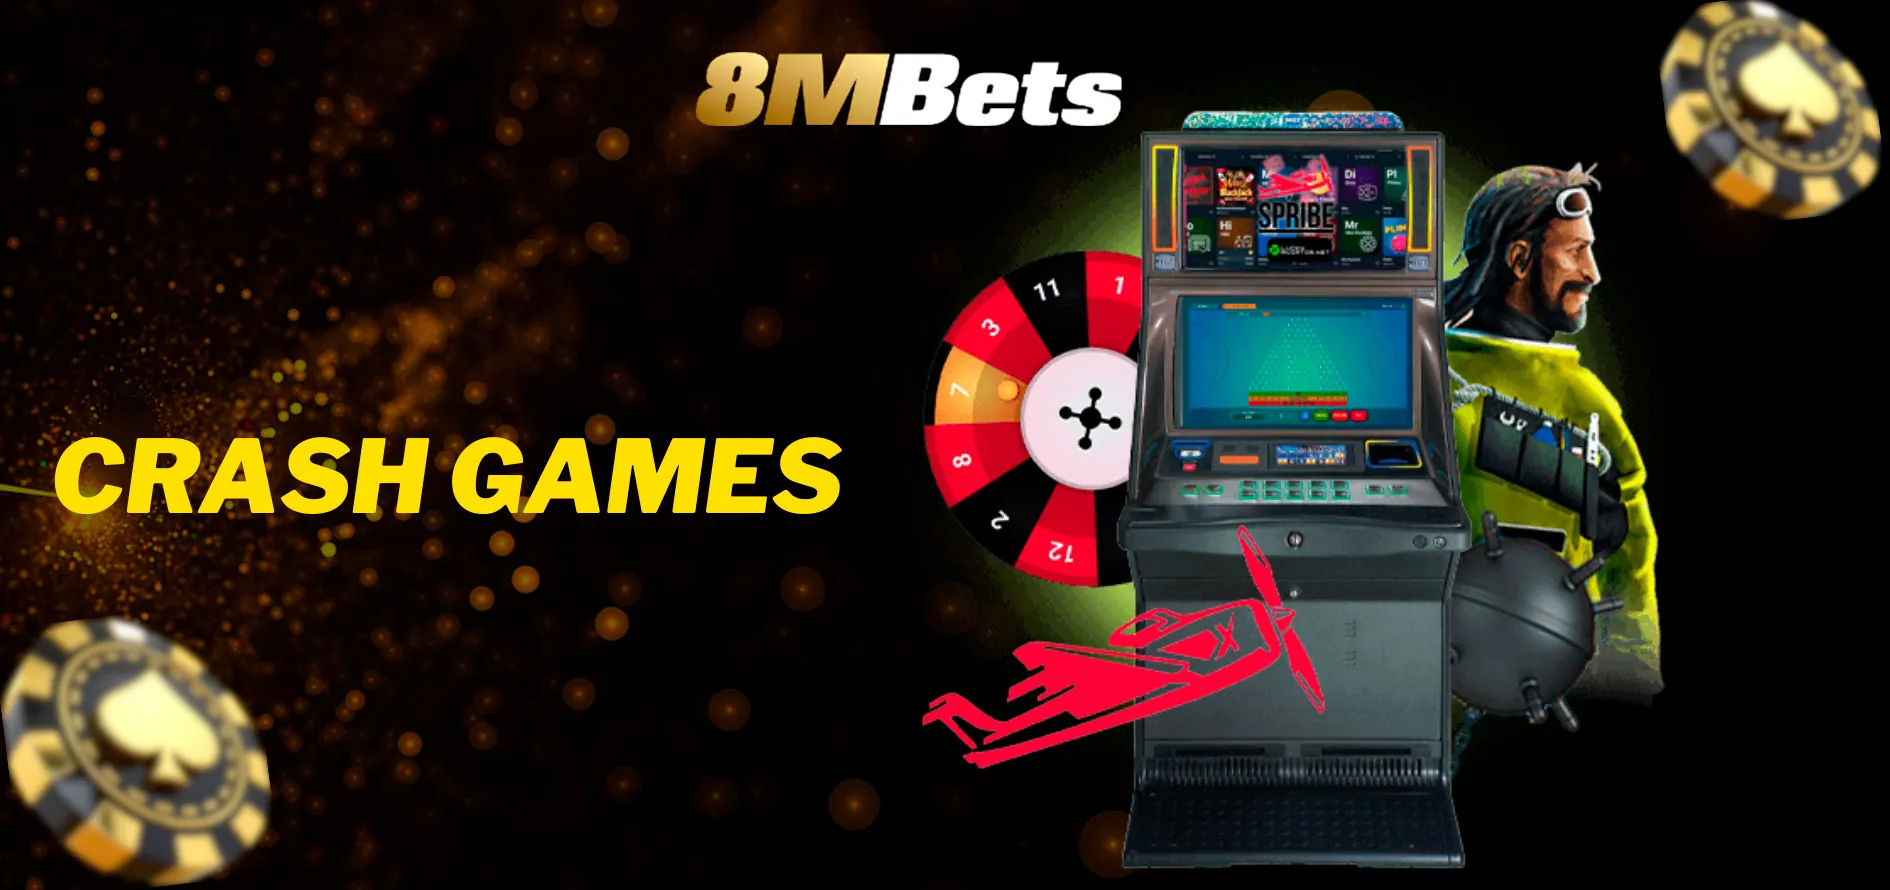 Experience the Thrill of Crash Games at 8MBet - Top Casino Games in Bangladesh